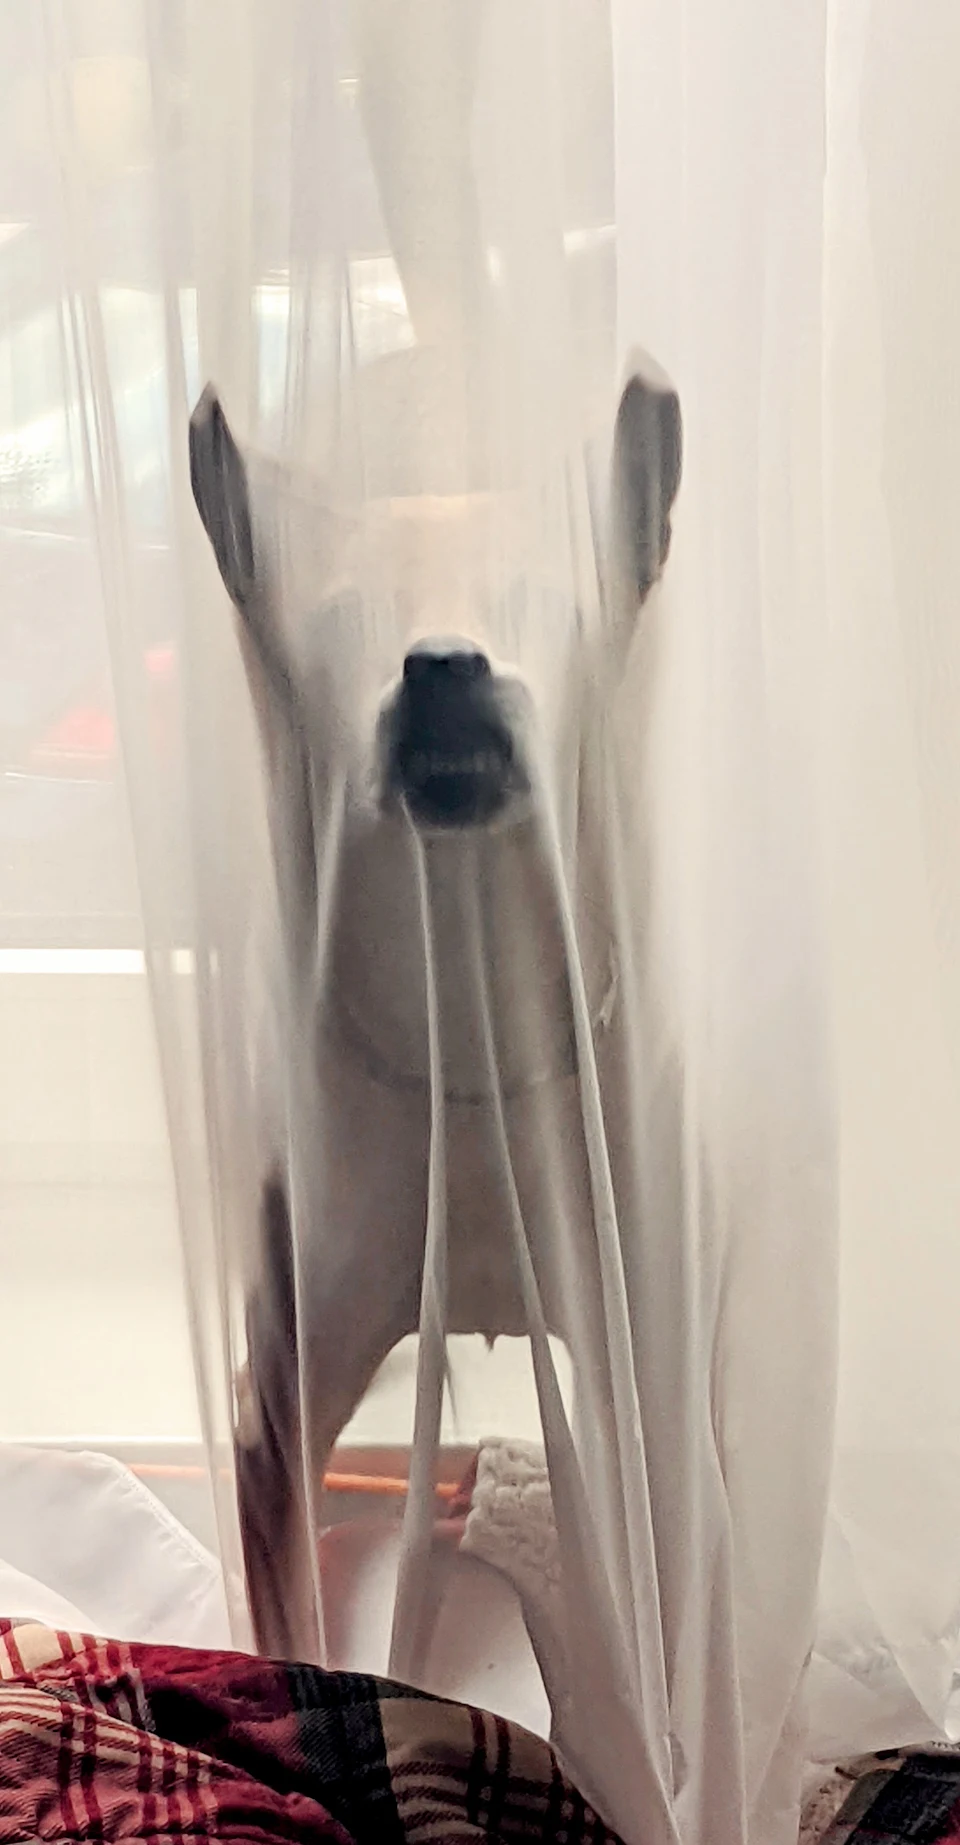 Our pup got stuck in the curtain and stood like this for a while